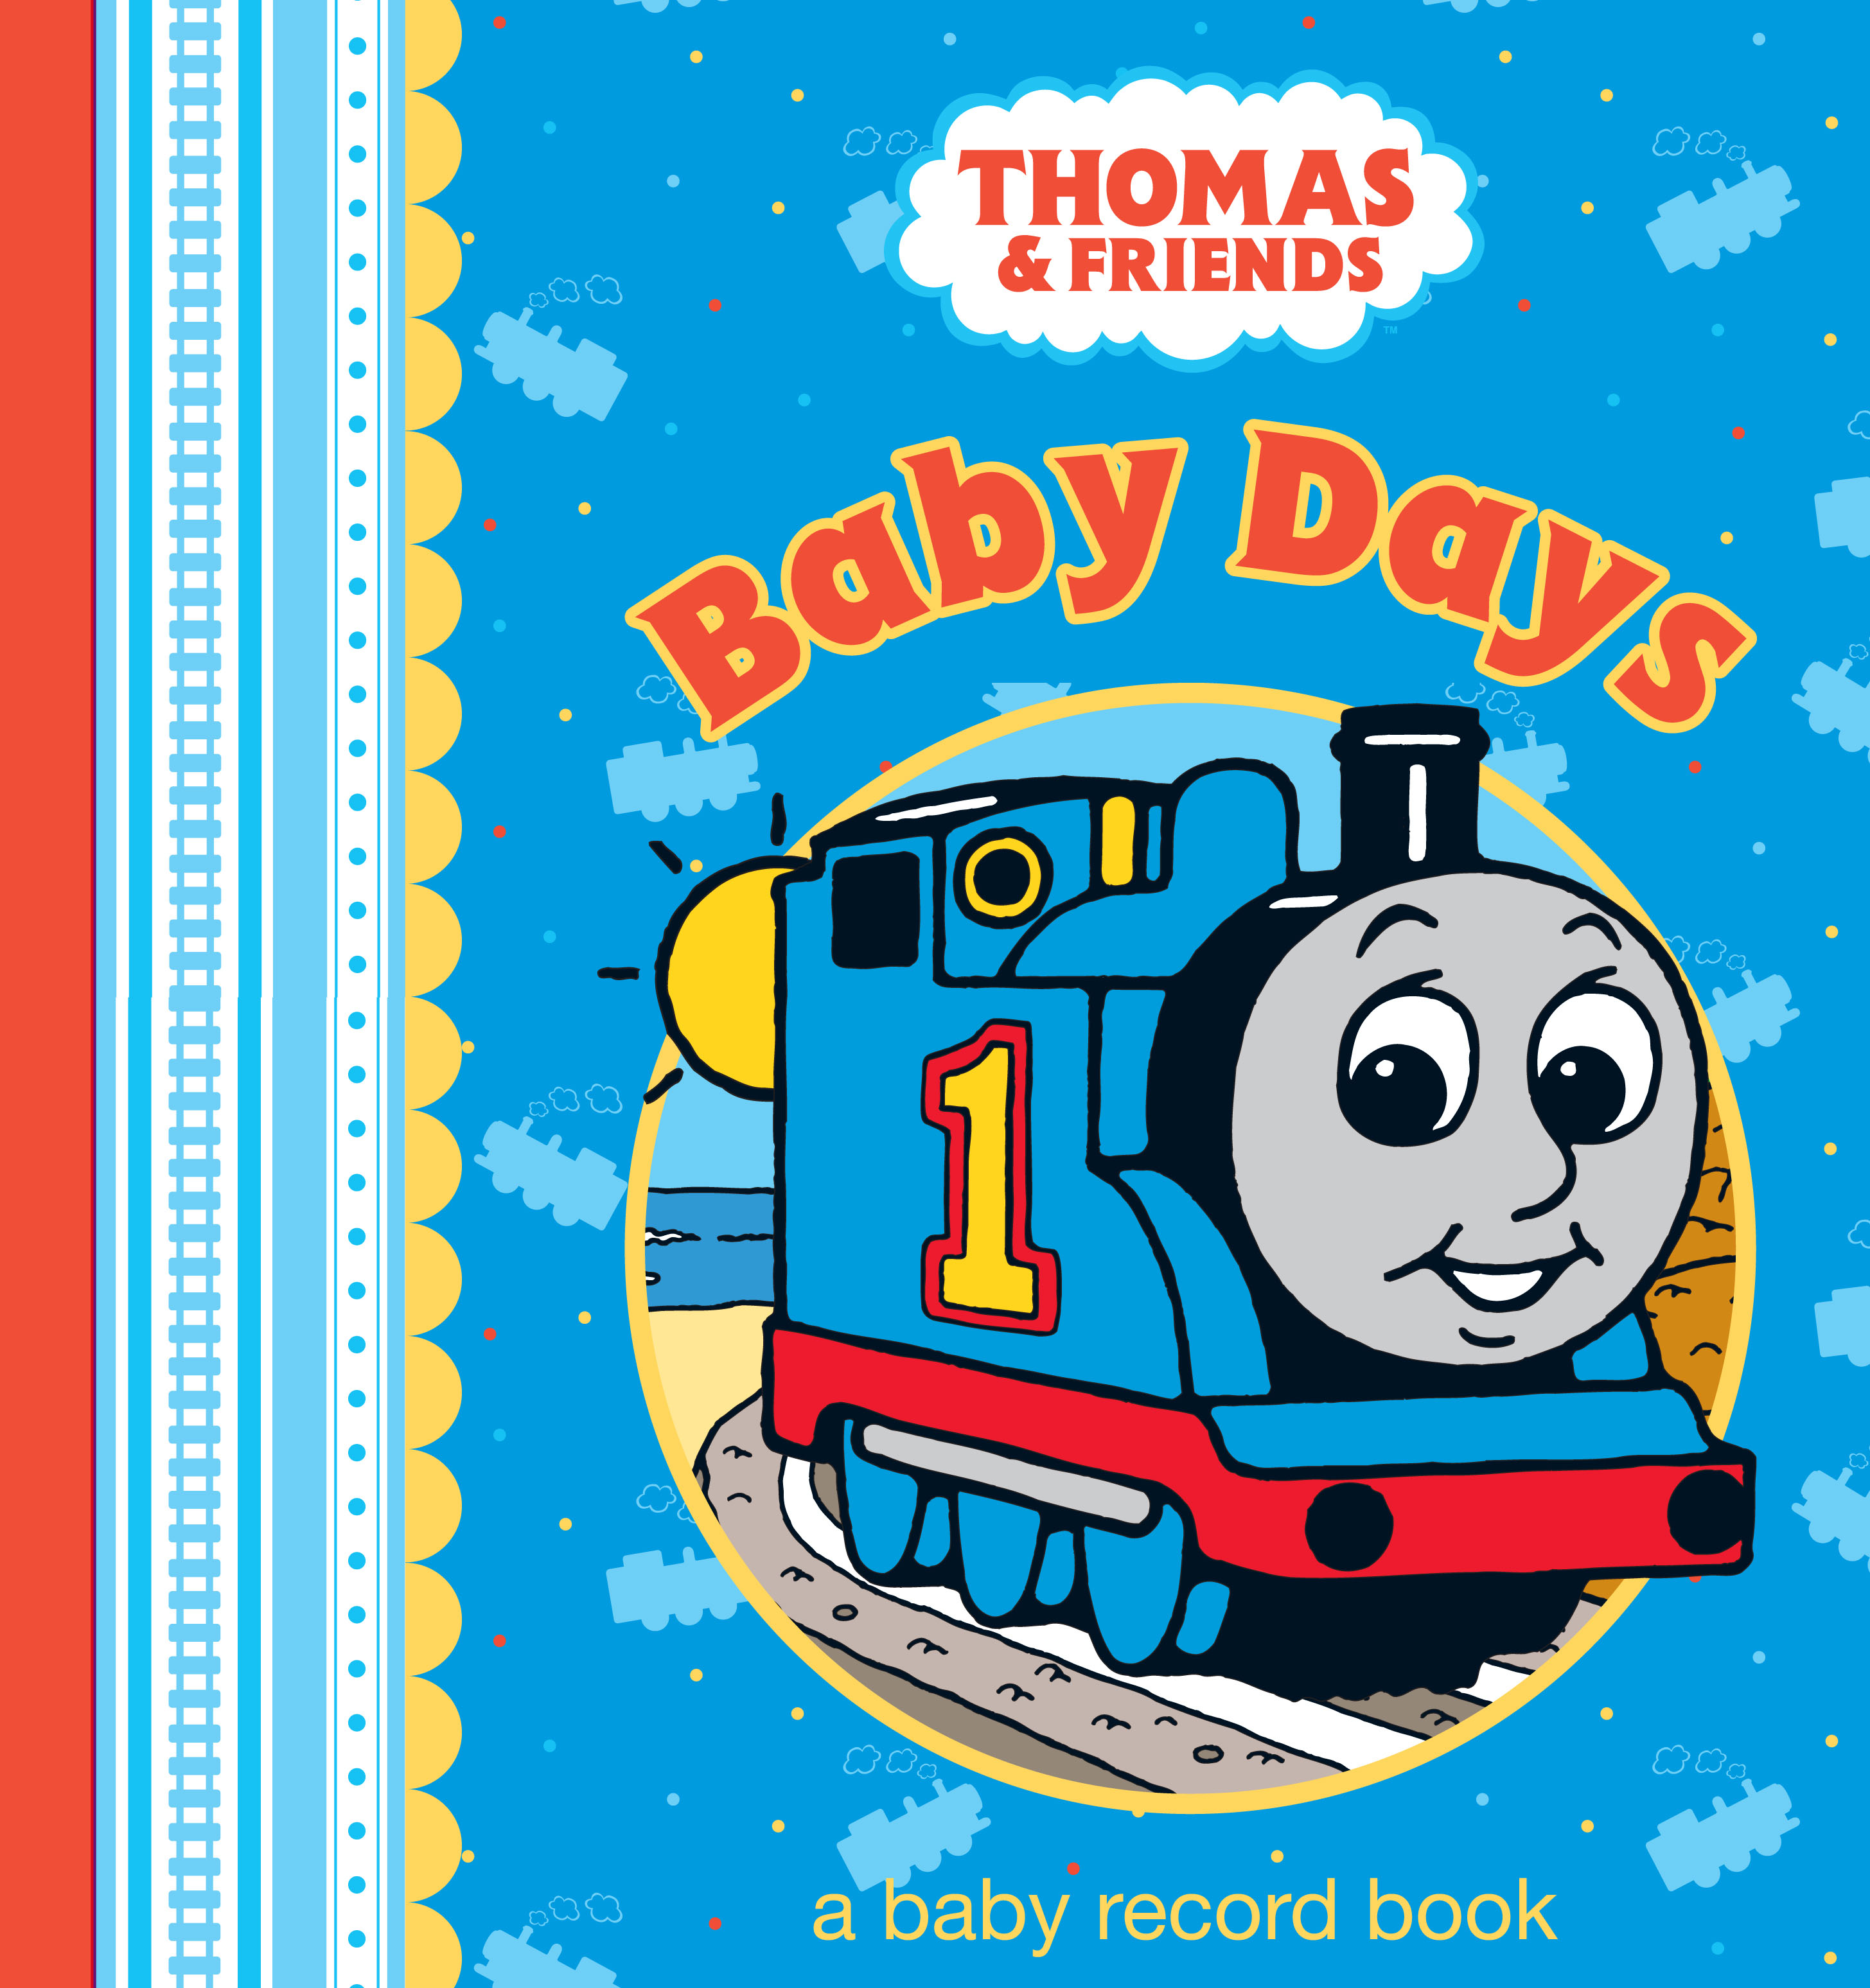 Thomas and Friends Baby Days 